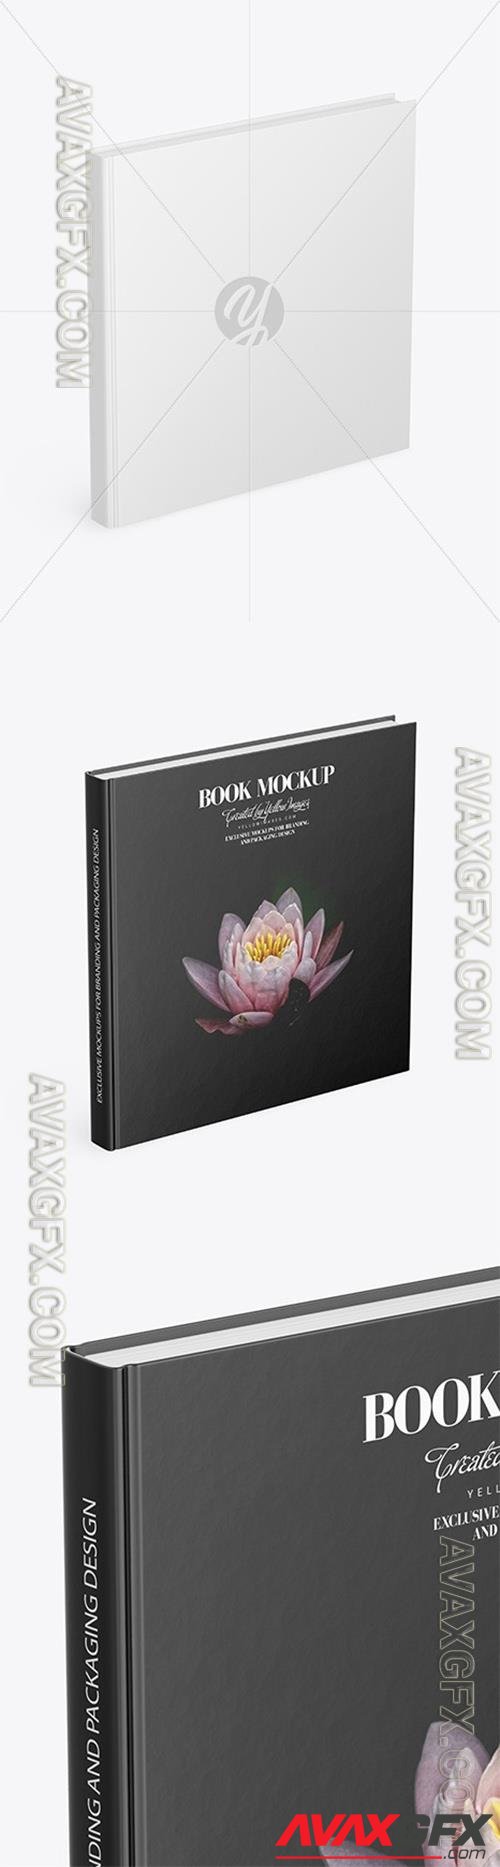 Book w/ Matte Cover Mockup - High Angle View 48171 TIF